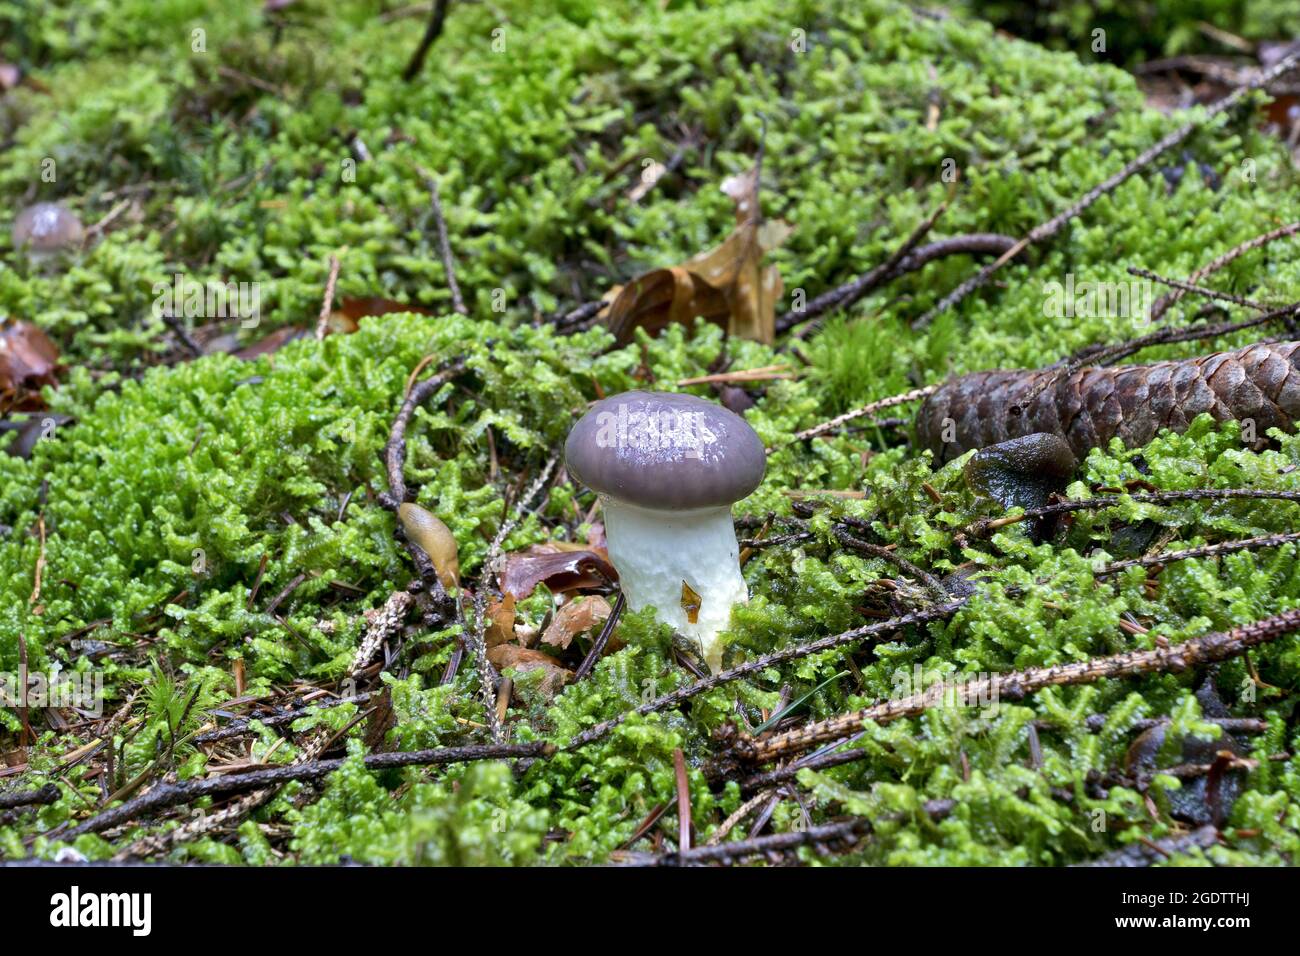 Gomphidius glutinosus, commonly known as the slimy spike-cap, is a gilled mushroom found in Europe & North America. Stock Photo